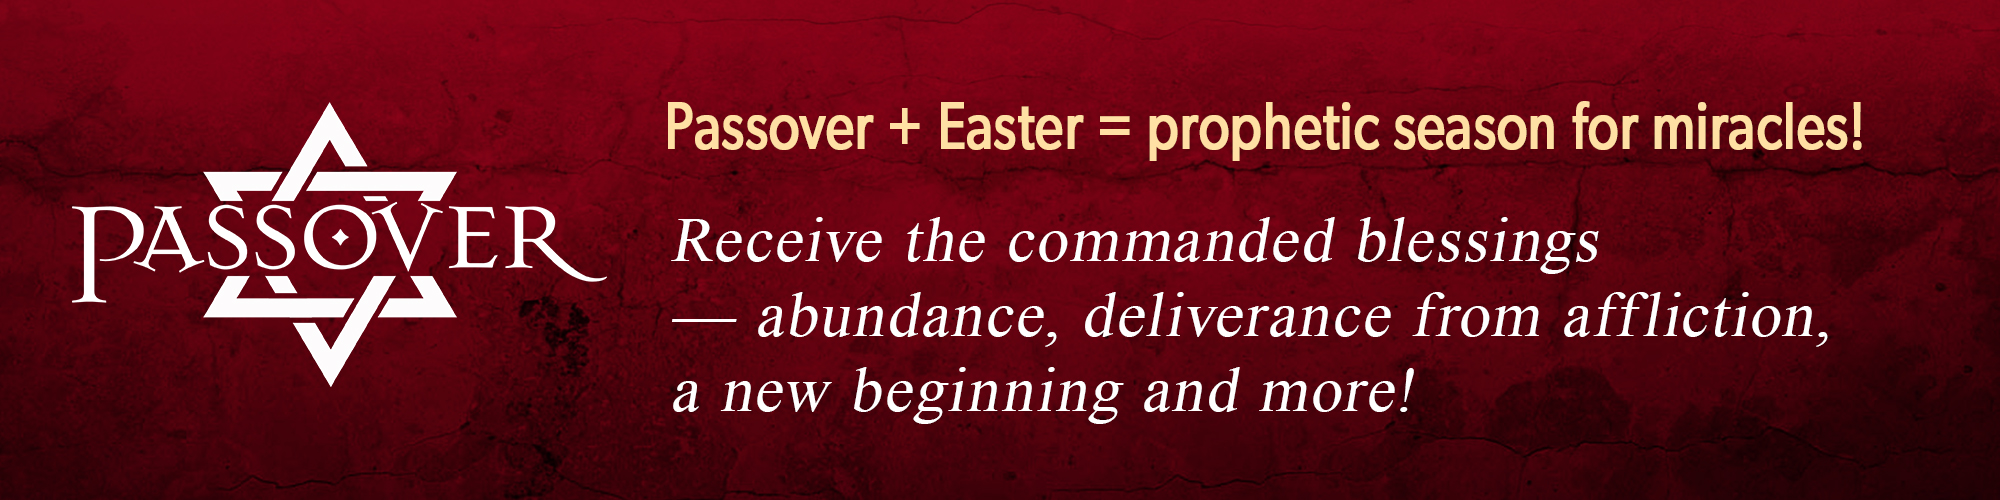 Passover + Easter = prophetic season for miracles! Receive the commanded blessings - abundance, deliverance from affliction, a new beginning and more!